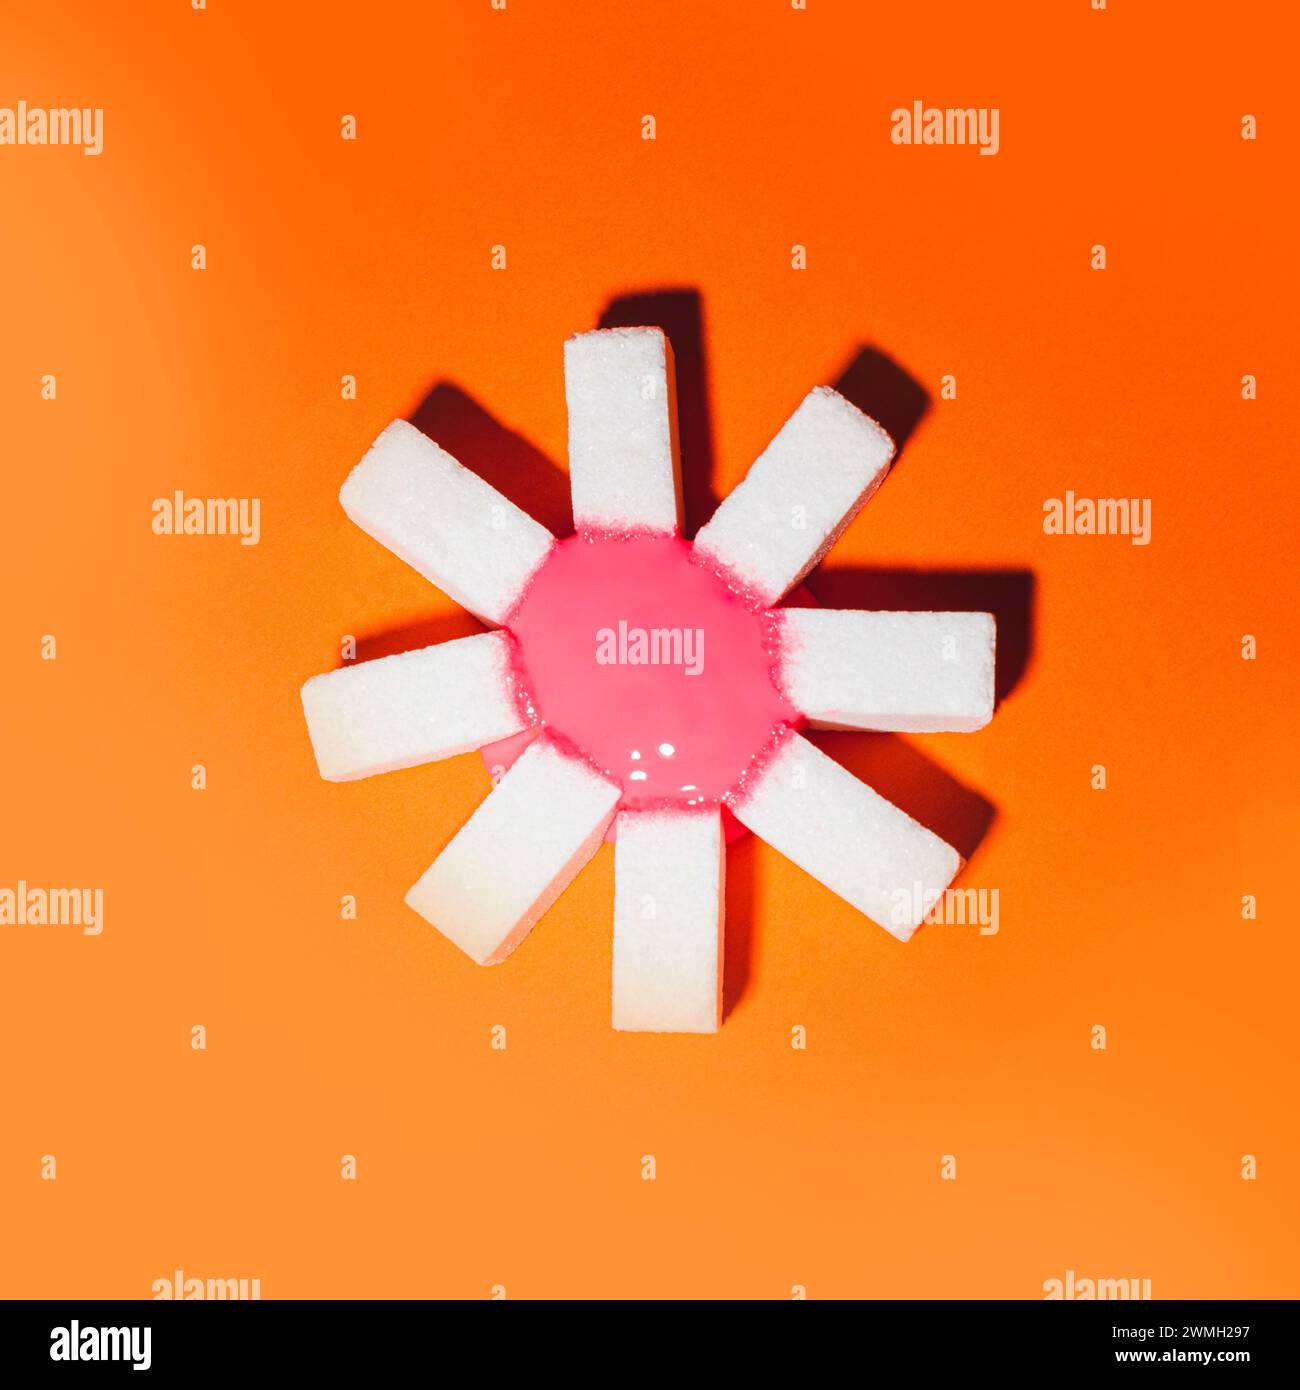 top view of white sugar cubes with red circle on orange background with copy space Stock Photo